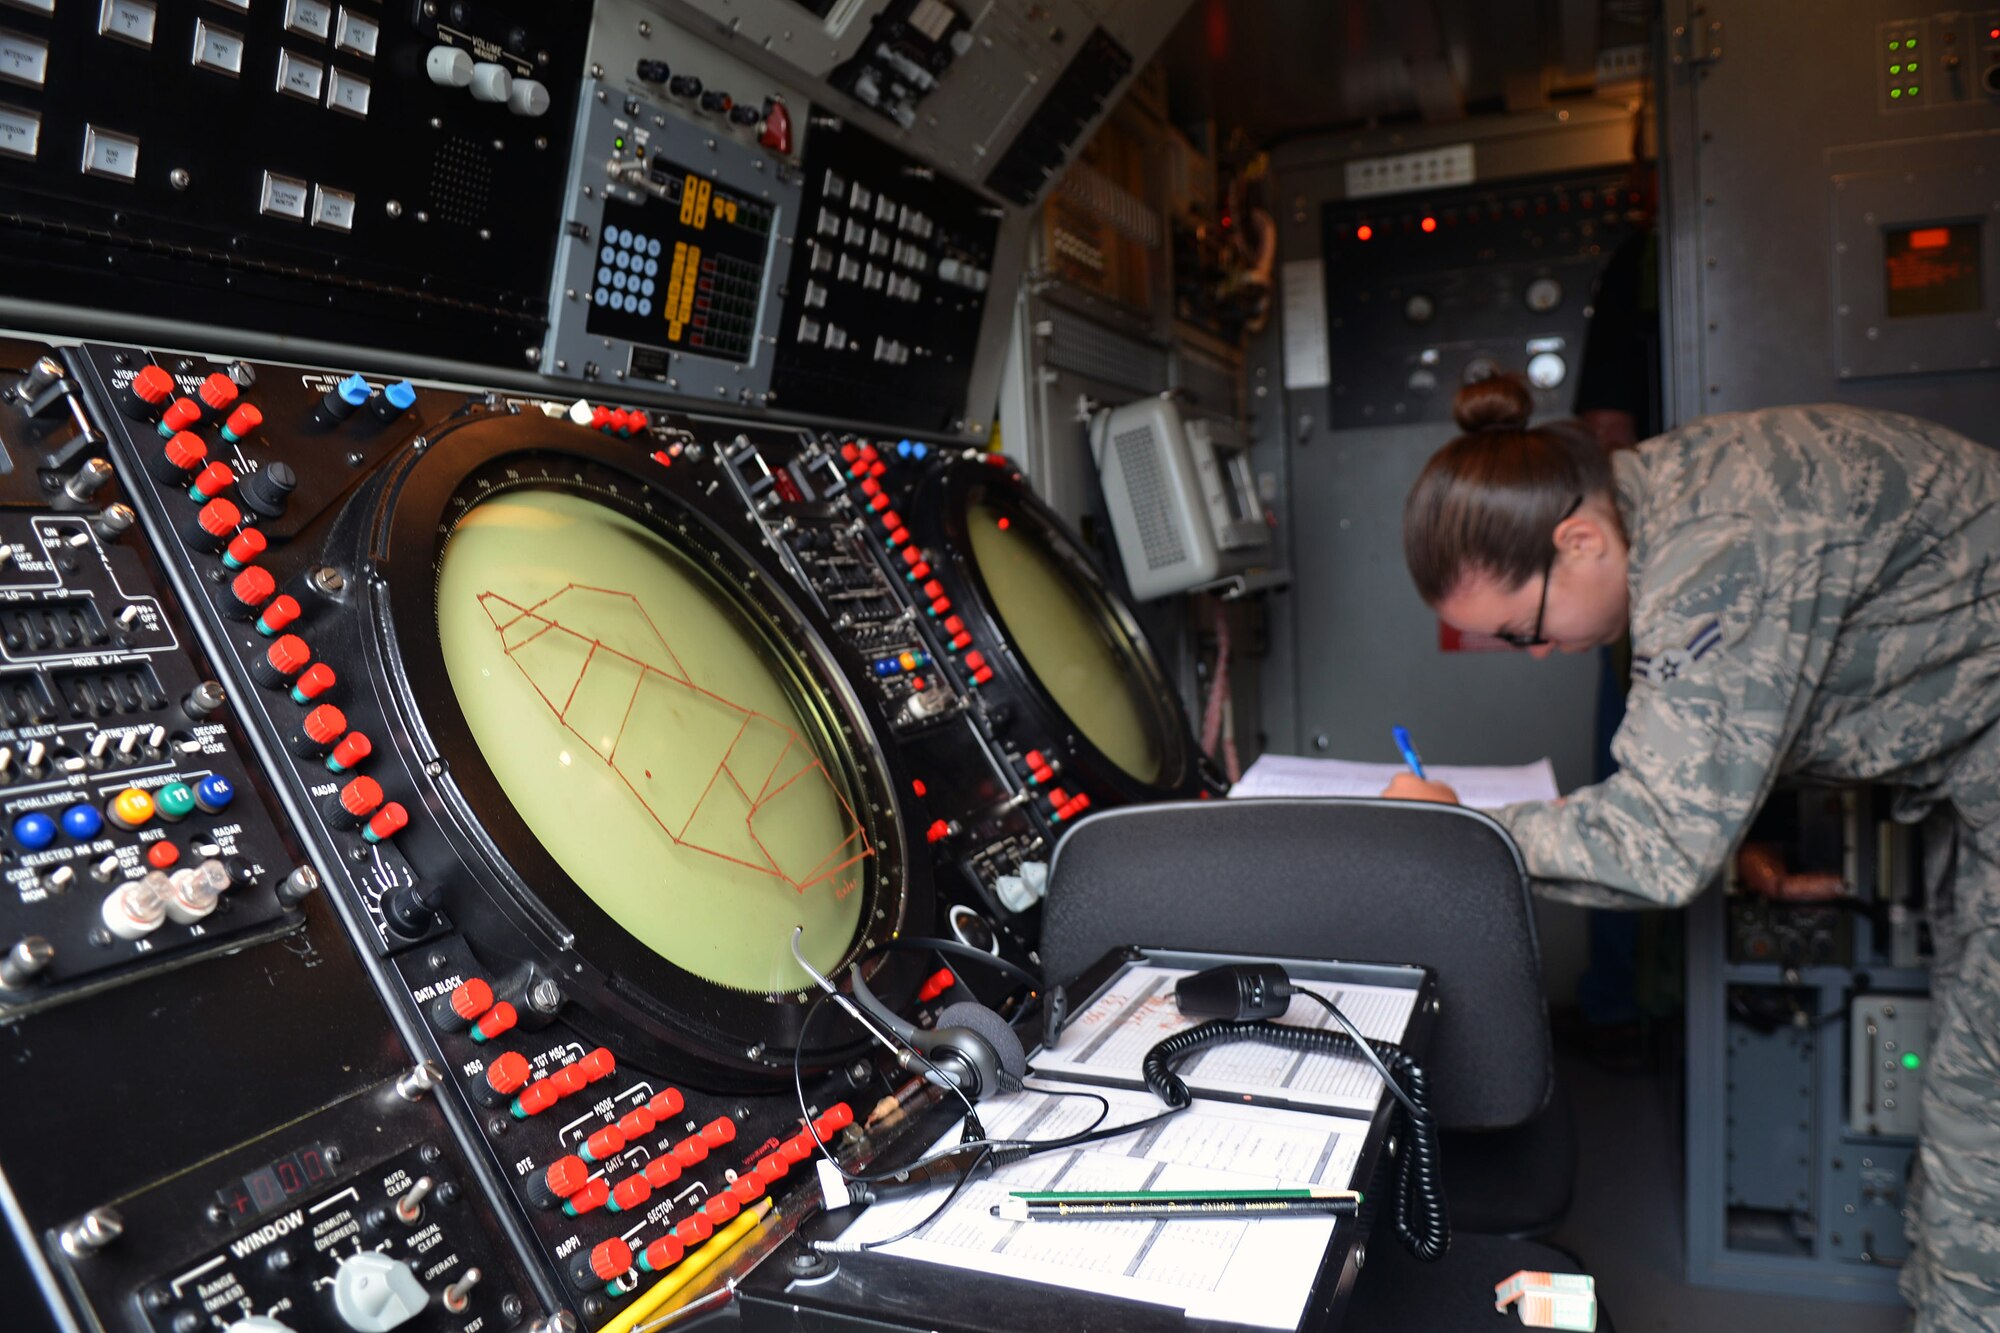 U.S. Air Force Airman 1st Class Juanita Baker, 606th Expeditionary Air Control Squadron ground radar apprentice from Damiansville, Ill., completes paperwork inside a 606th EACS radar operations trailer June 12, 2014, at Powidz Air Base, Poland. The 606th EACS serves as a Control and Reporting Center that provides tactical control to the aircraft participating in Poland's EAGLE TALON exercise and the U.S. Air Force Aviation Detachment's Rotation 14-3 training exercise. (U.S. Air Force photo/Airman 1st Class Kyla Gifford/Released)